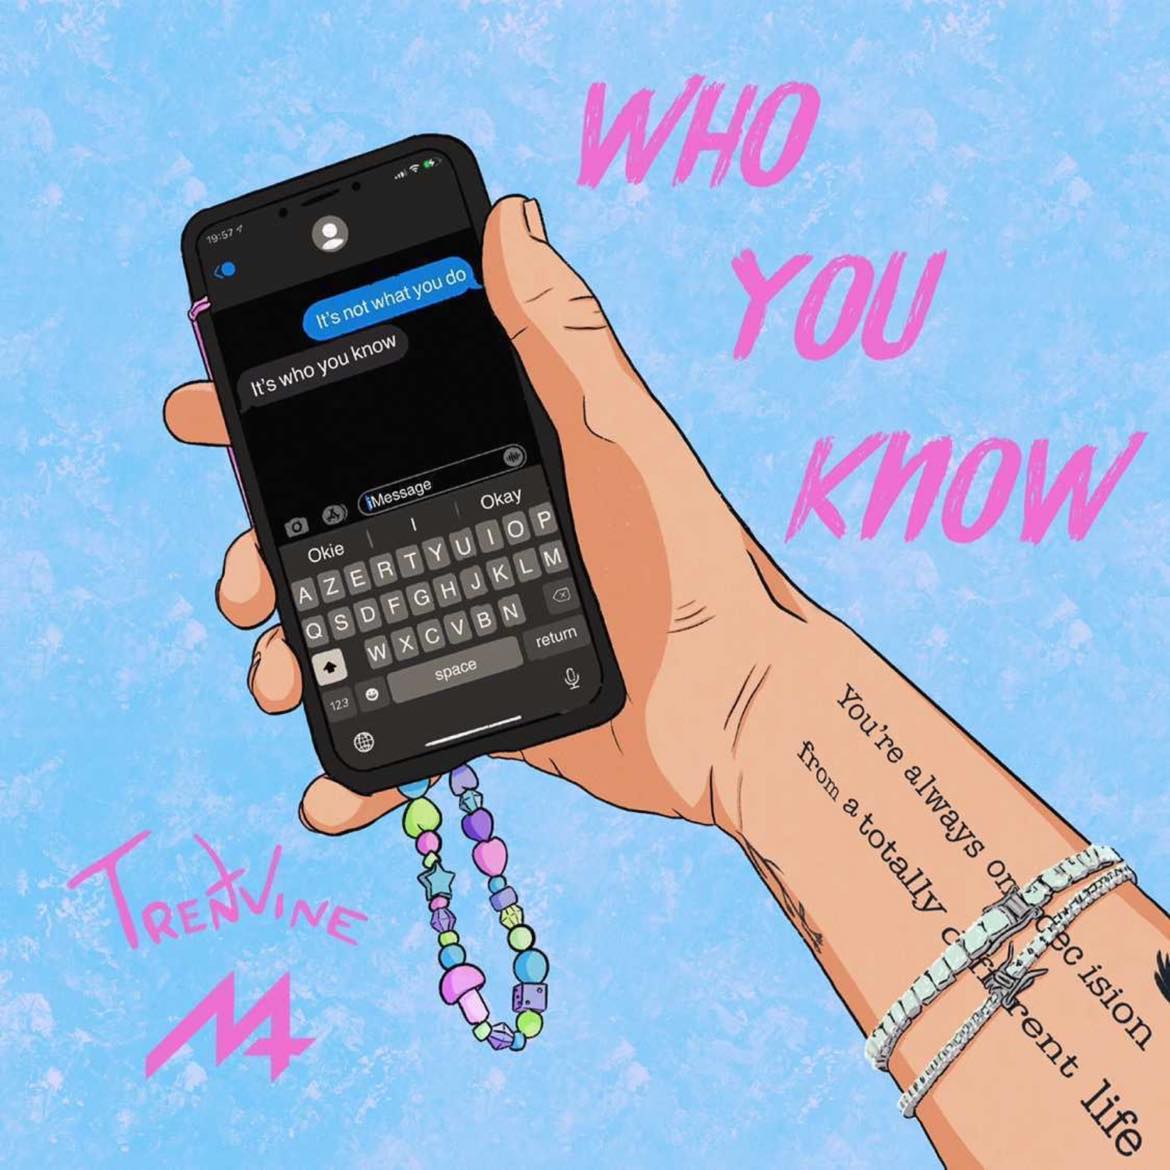 Album art with a cartoon hand holding a phone, displaying messages.